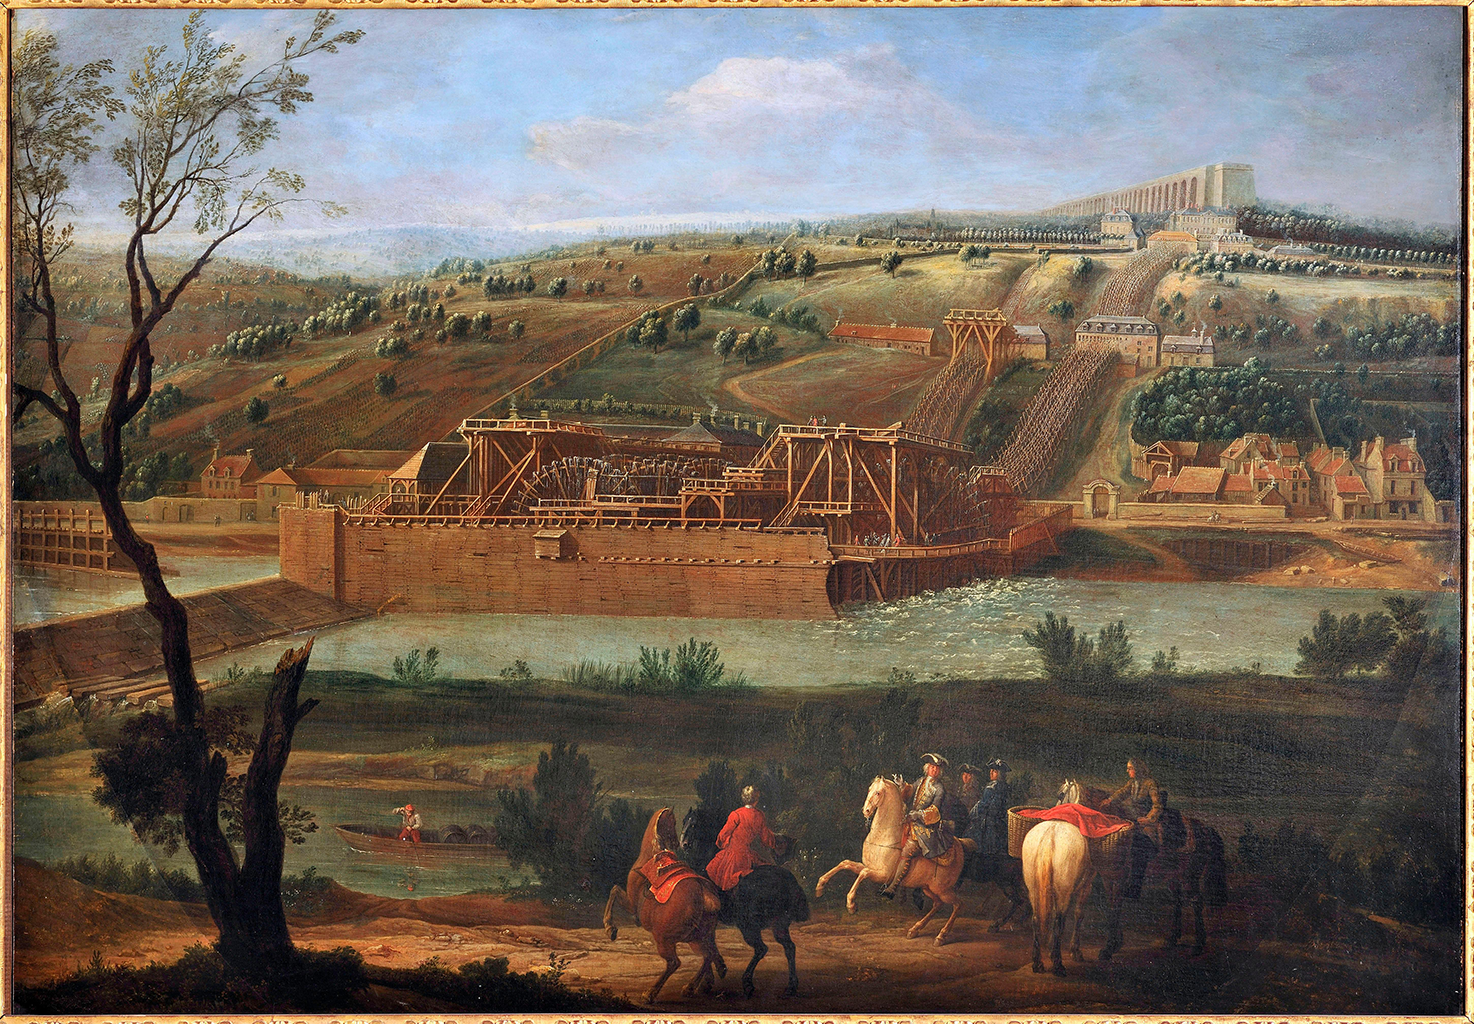 A painting depicting a river cutting through a vast green and brown countryside. Among them, are small towns and a massive and long stone structure in the distance. In the foreground, there is a group of people riding their horses near a tree with a missing limb. Behind them, is a person rowing a small wooden boat through the river. On the bank is a large complex wooden structure. The background consists of a blue sky with white clouds.